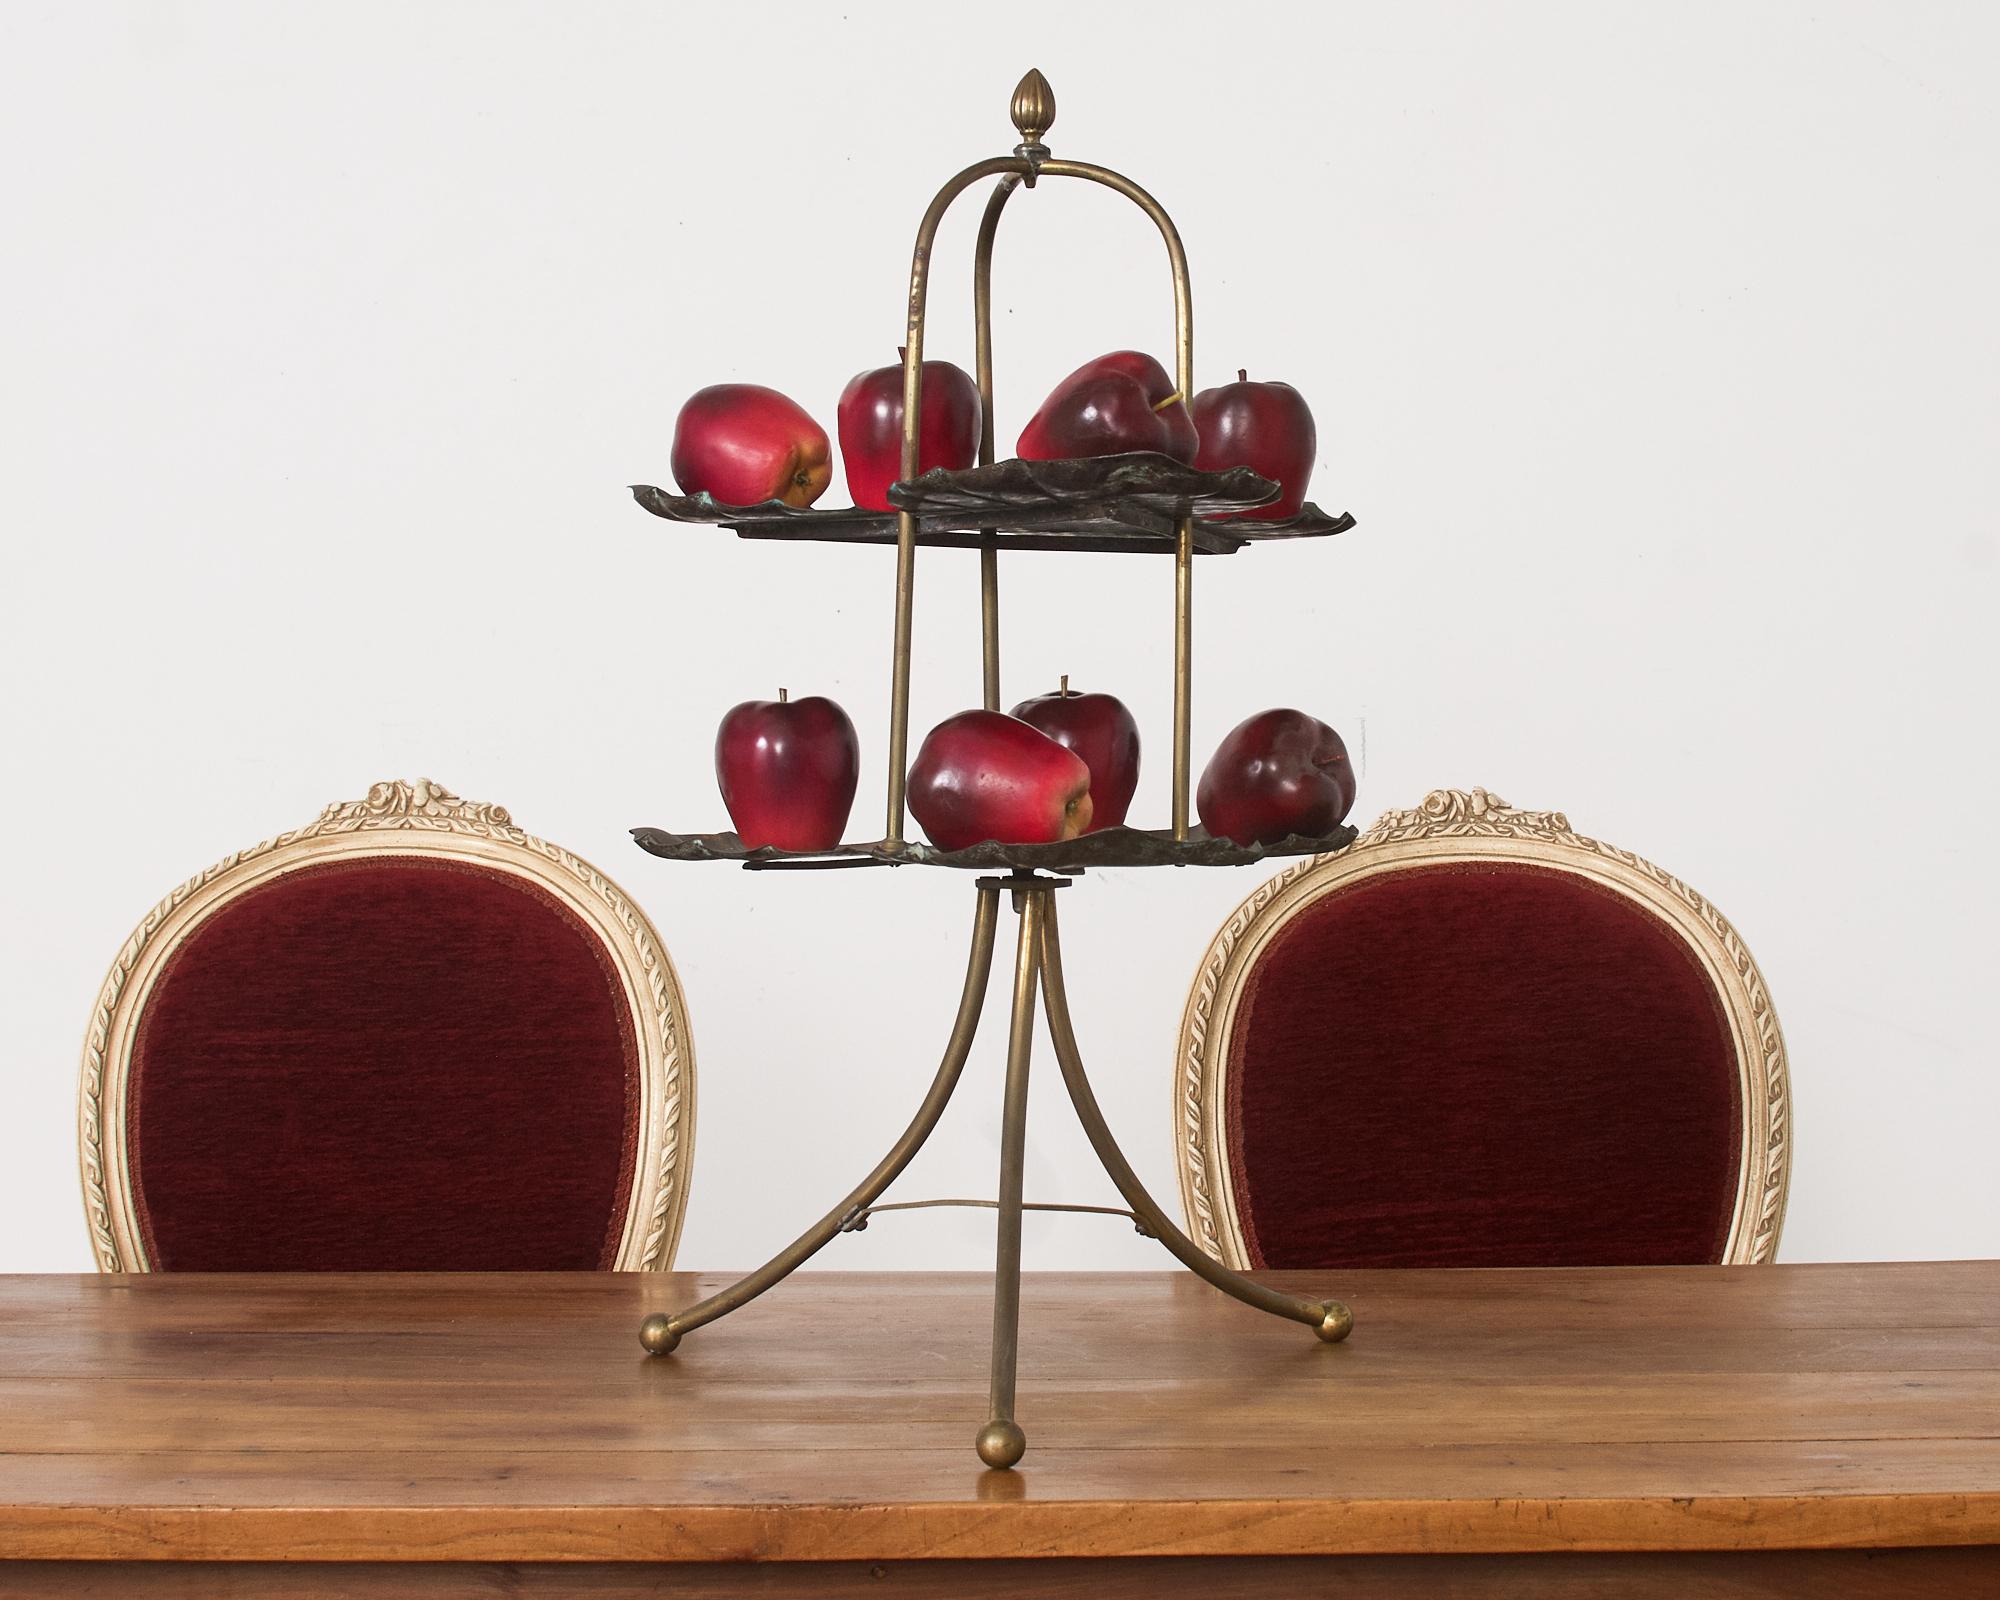 Beautifully patinated bronze and brass tiered dessert or muffin stand featuring lotus leaf or water lily pad tiers. The stand has a fluted finial on top with three legs conjoined to the two tiers. The top is supported by a tripod base ending with